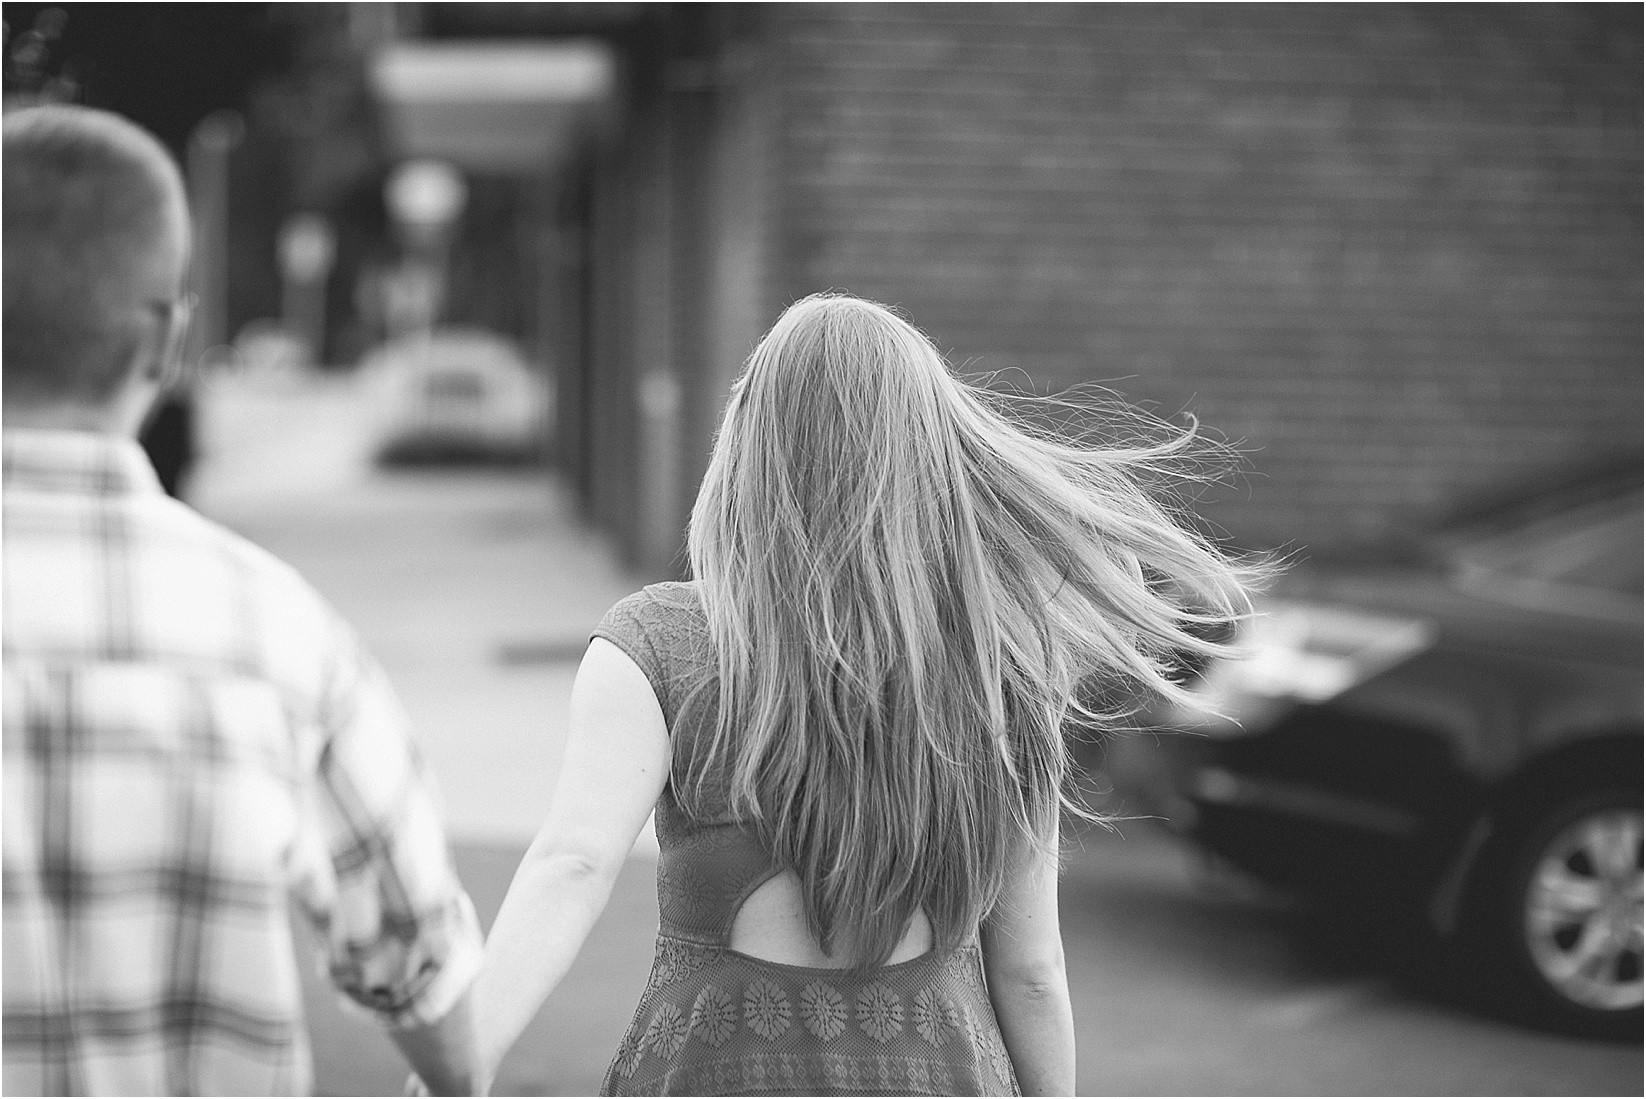 Hair blowing while walking during Andria & Matts Mount Pleasant engagement session in downtown mount pleasant nc